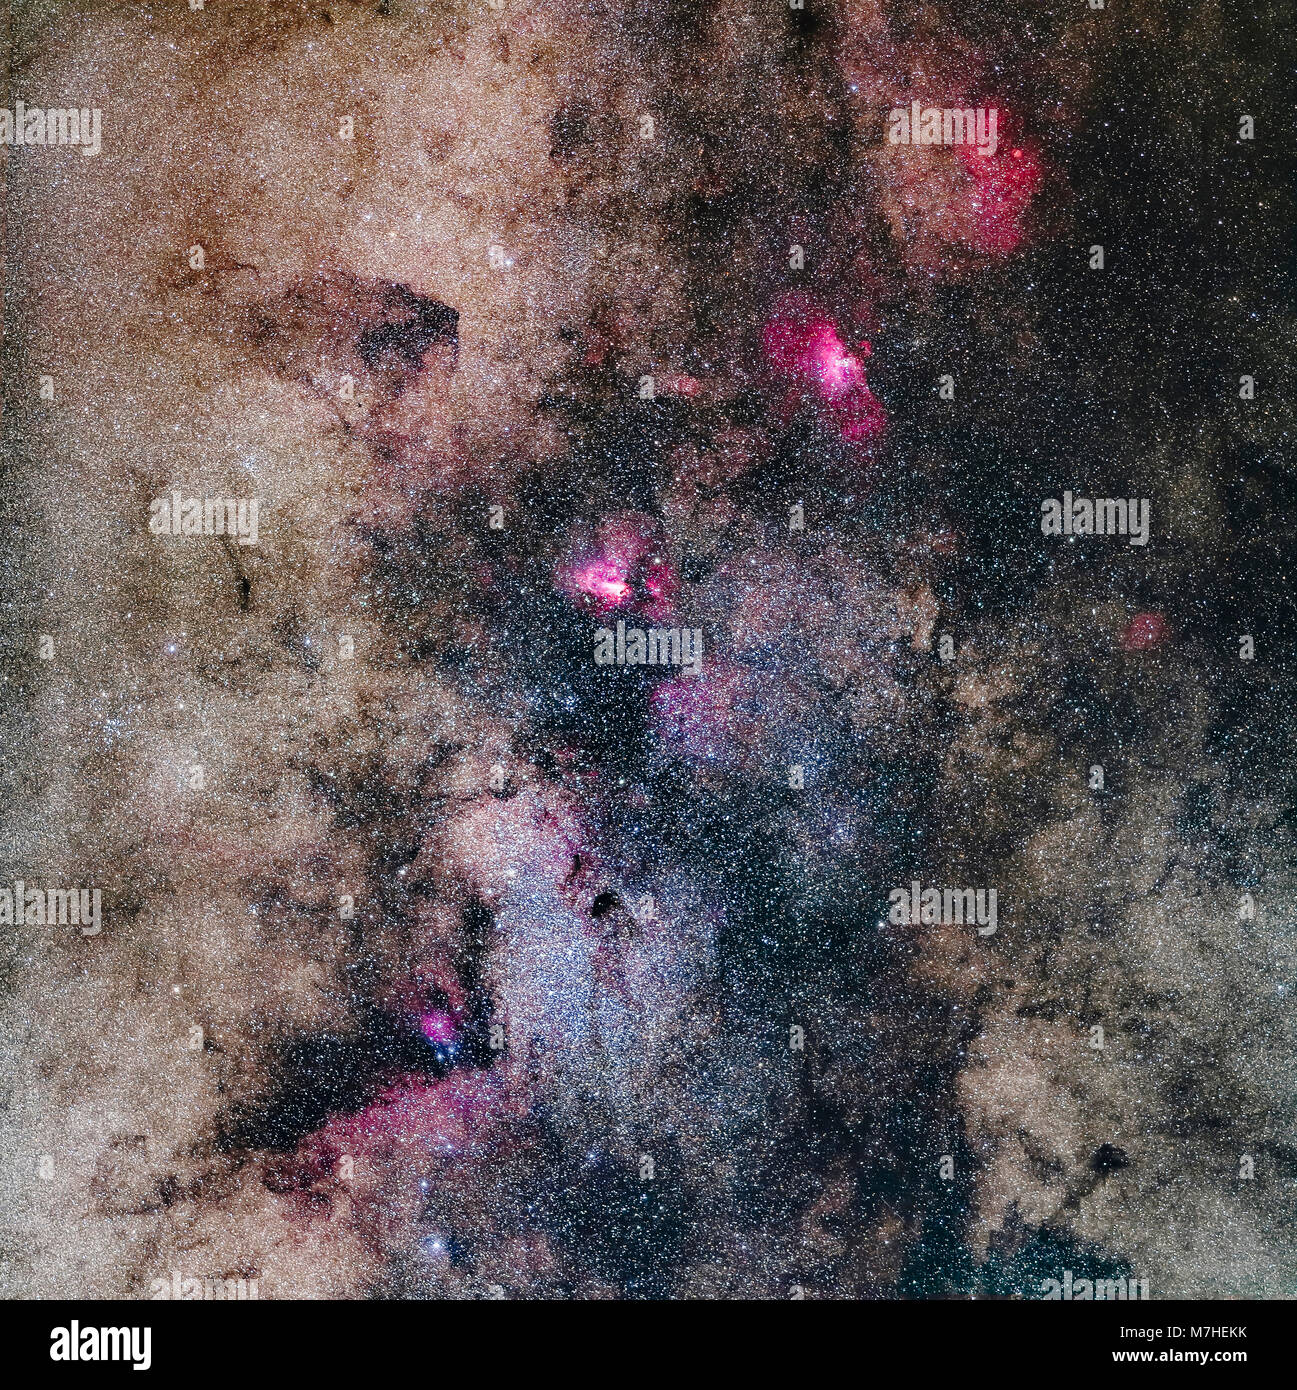 Mosaic of the rich region in Sagittarius and southern Serpens. Stock Photo